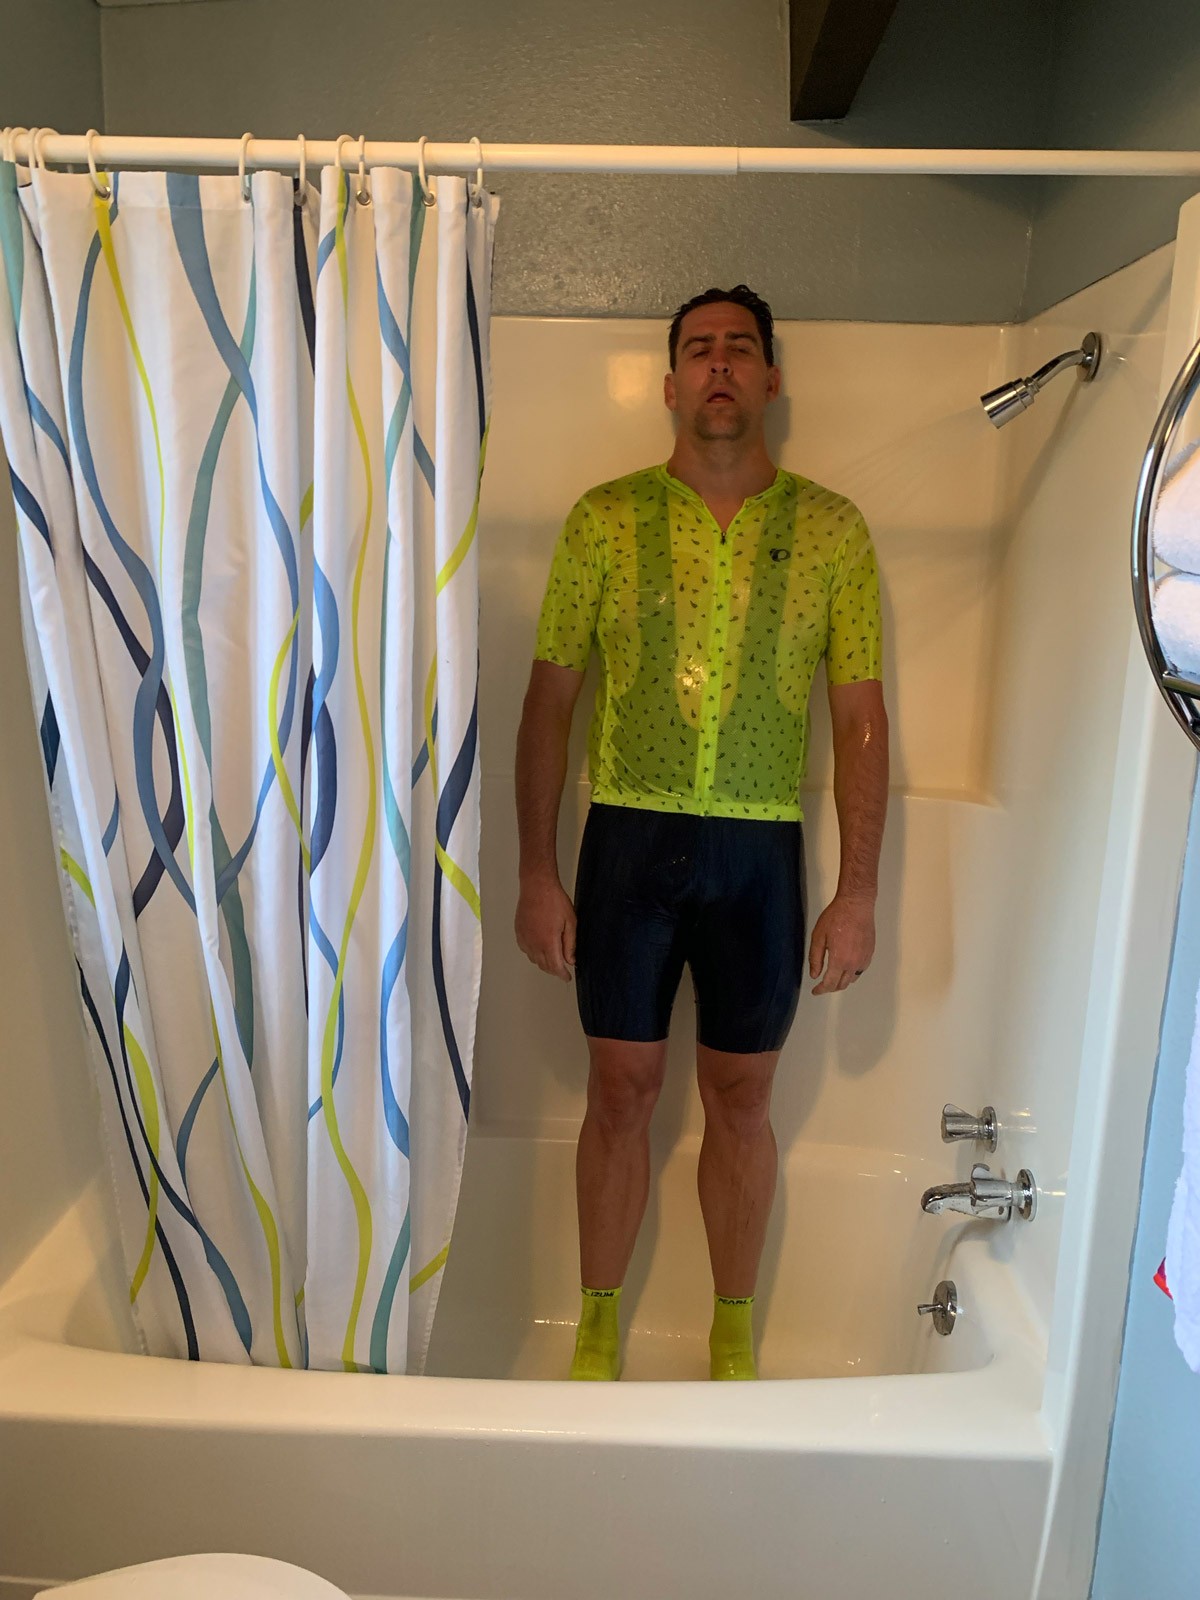 Rob in bike gear in the shower after the ride.